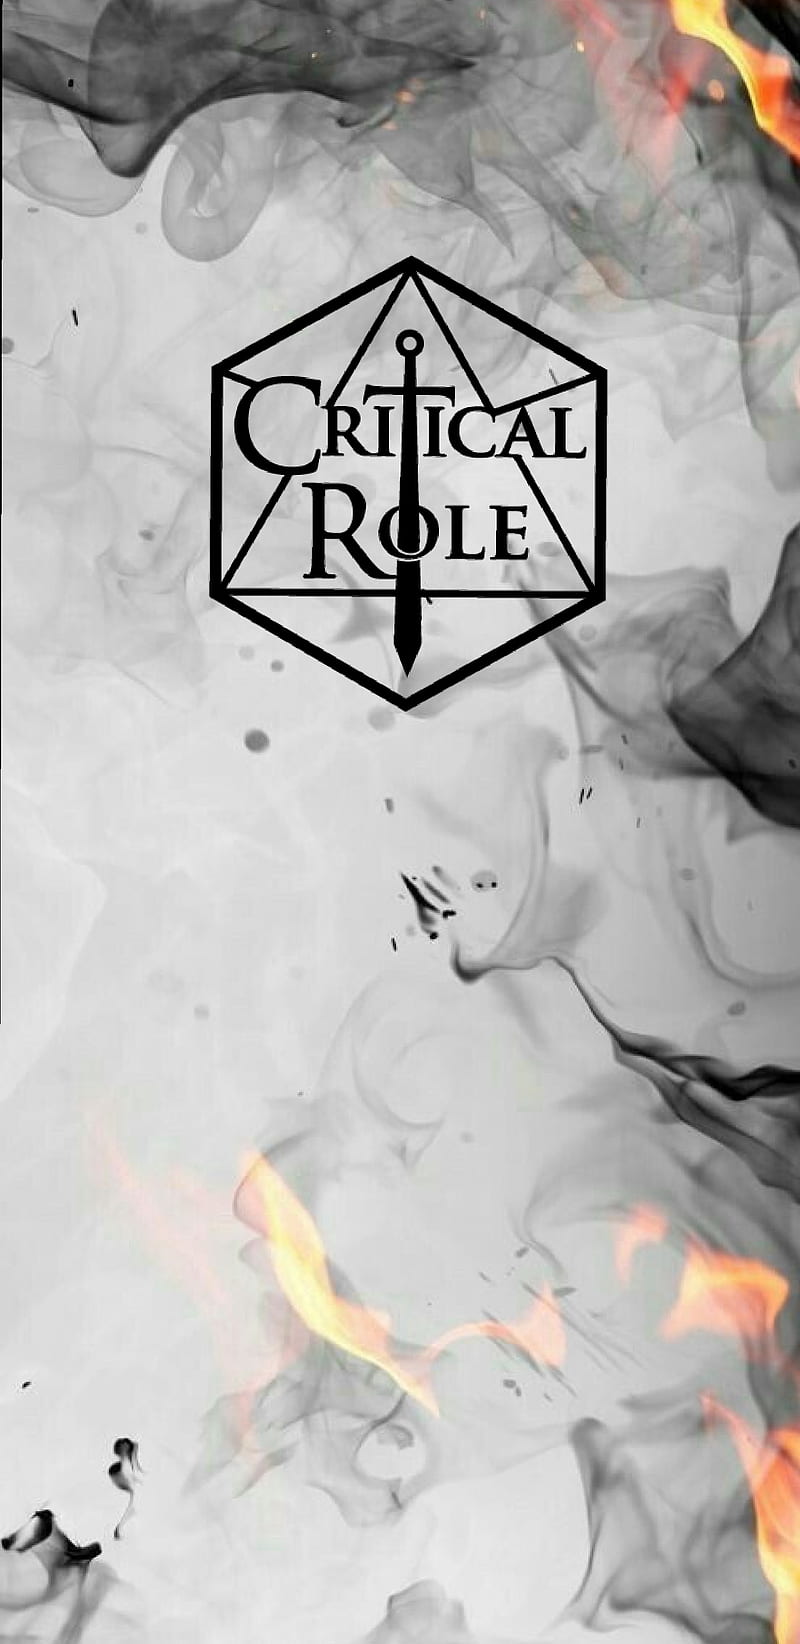 Critical role flames, critical, dice, dm, dnd, dragons, dungeons, role, rpg, tabletop, HD mobile wallpaper